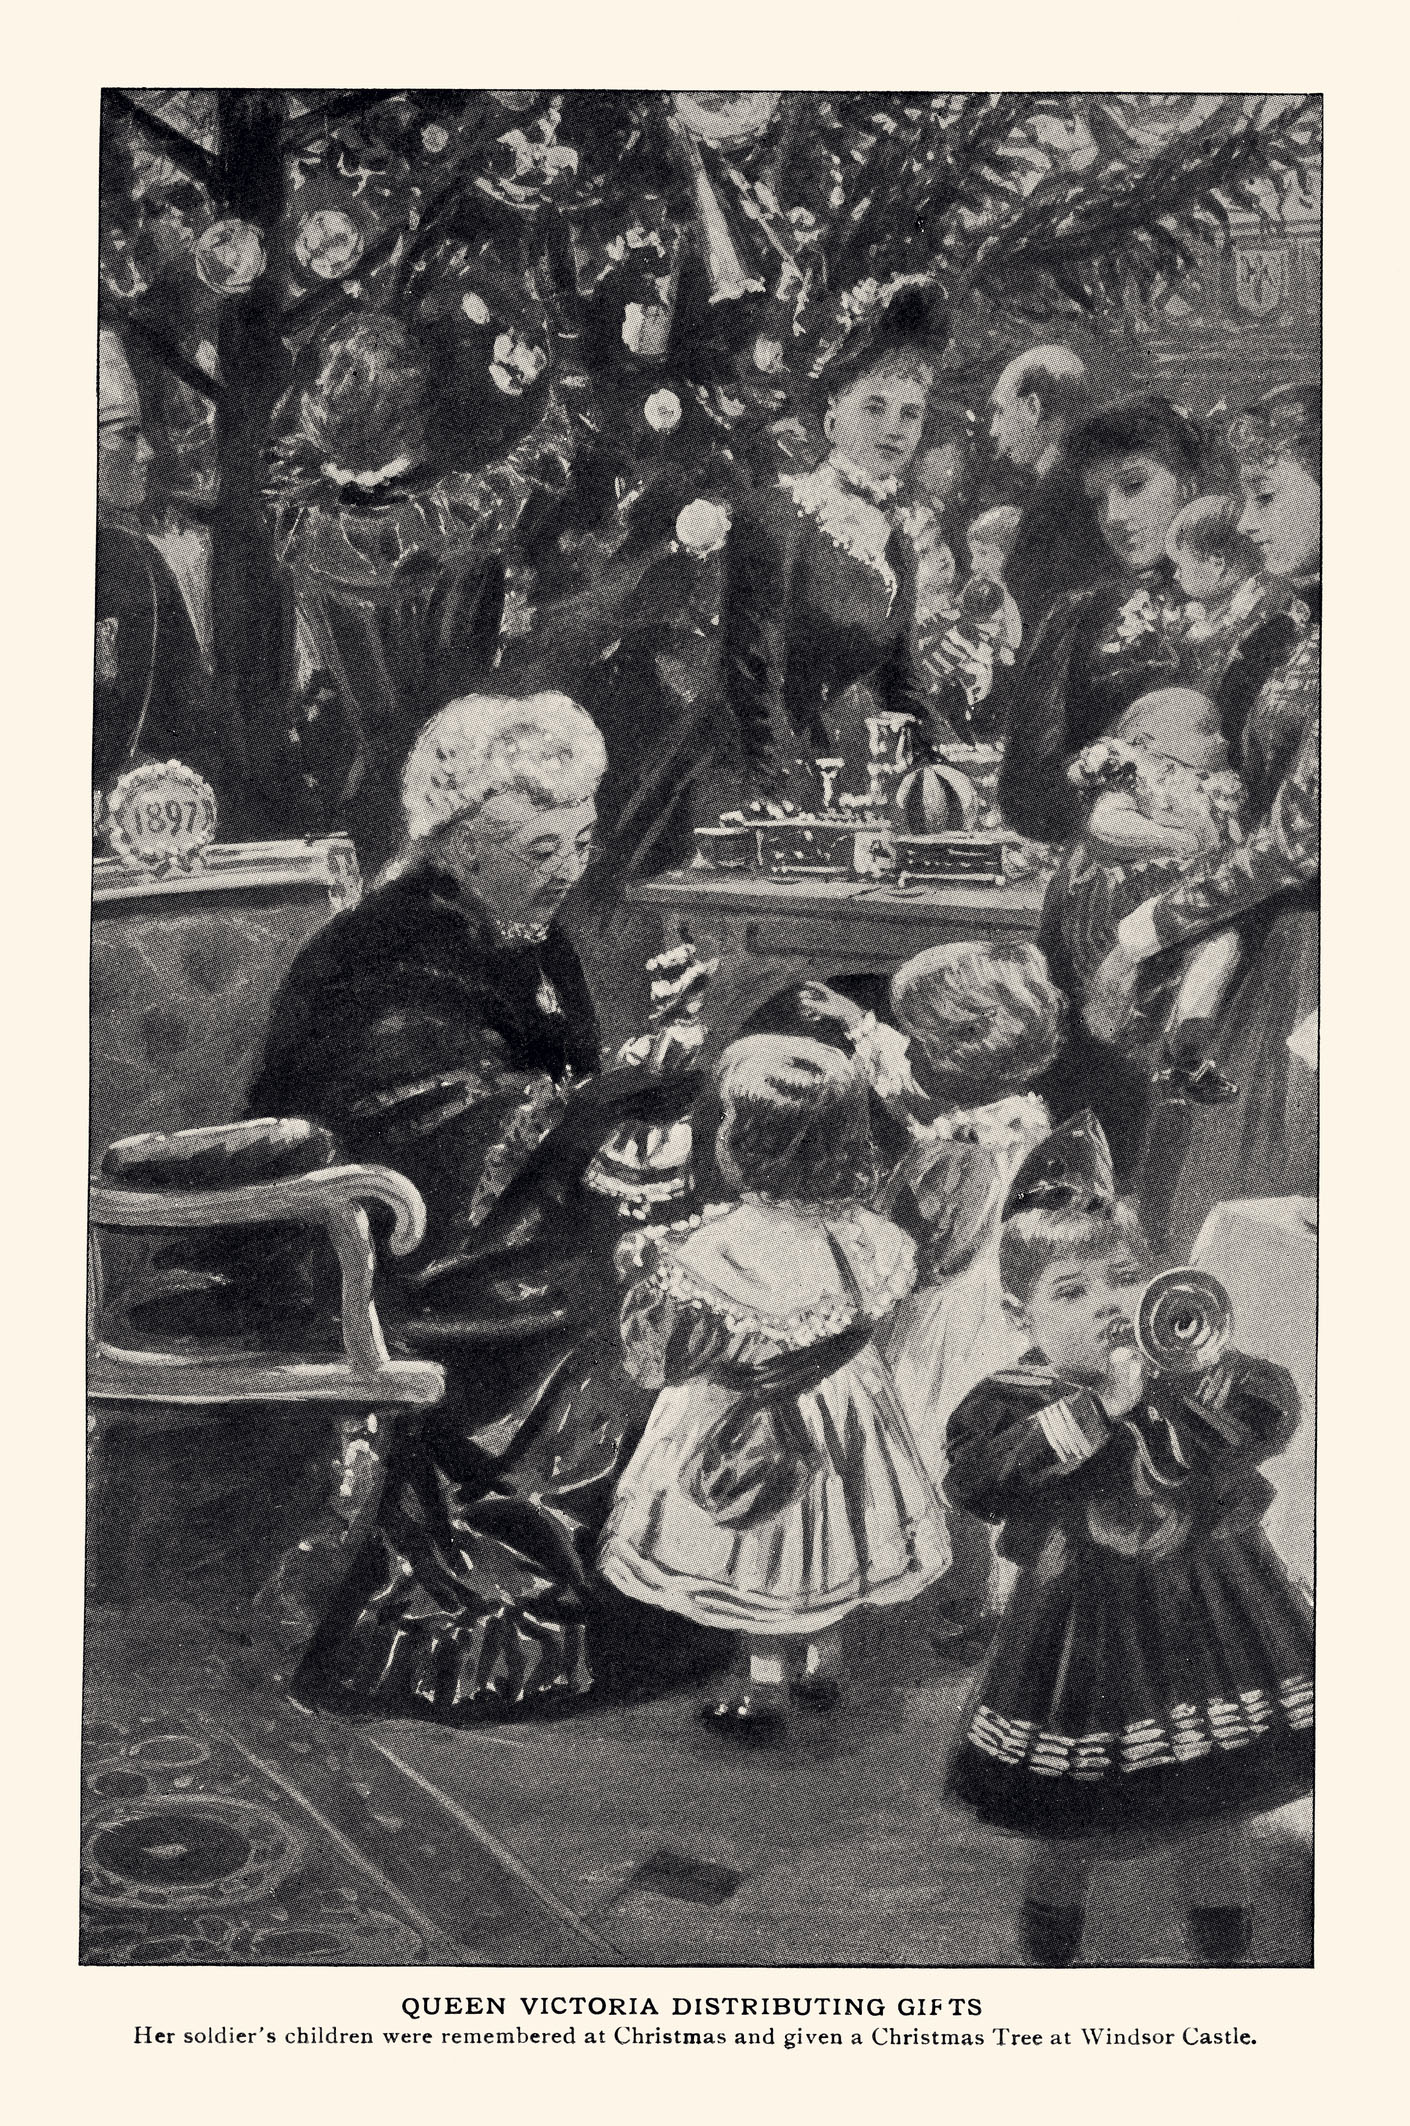 Black and white image of Queen Victoria distributing gifts at Windsor Castle